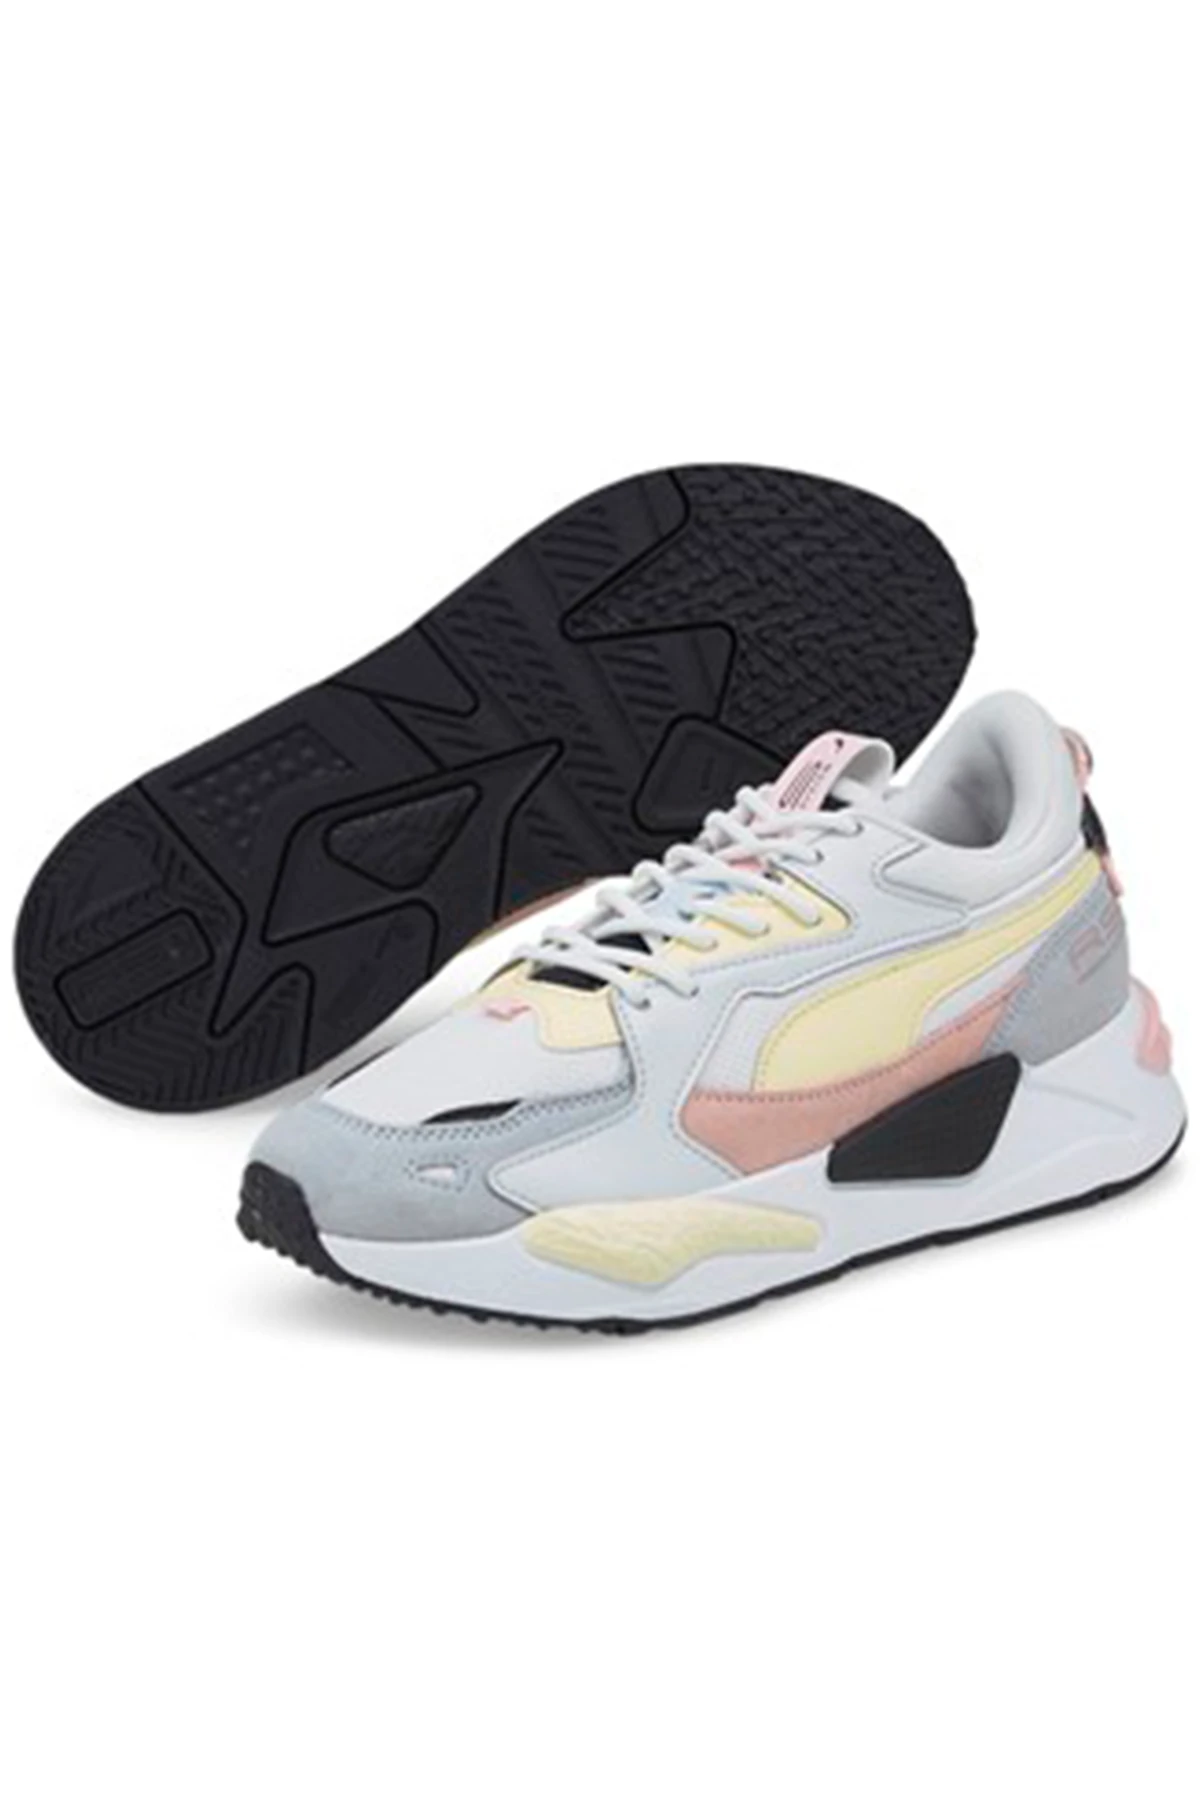 PUMA RS-X Reinvent Wn's Sneakers For Women - Buy PUMA RS-X Reinvent Wn's  Sneakers For Women Online at Best Price - Shop Online for Footwears in  India | Flipkart.com